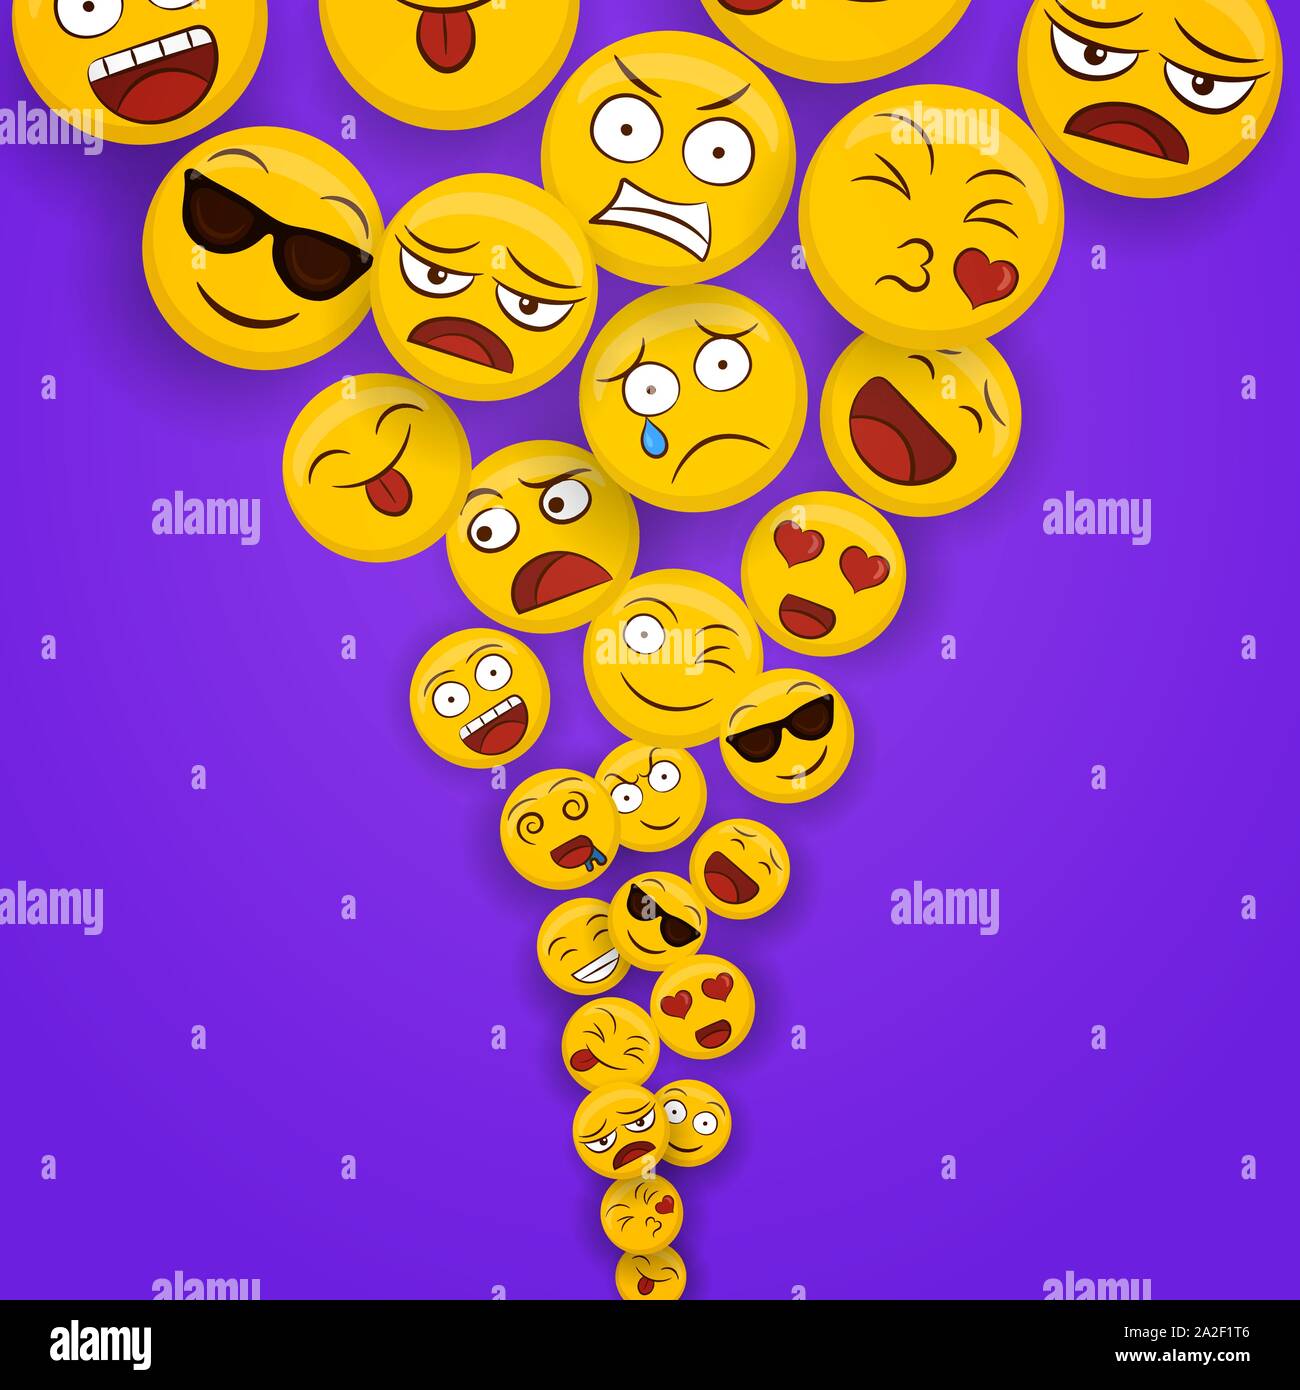 Social yellow emoticon icons on isolated background. Fun smiley face cartoons includes happy, cute and funny emotions. Stock Vector